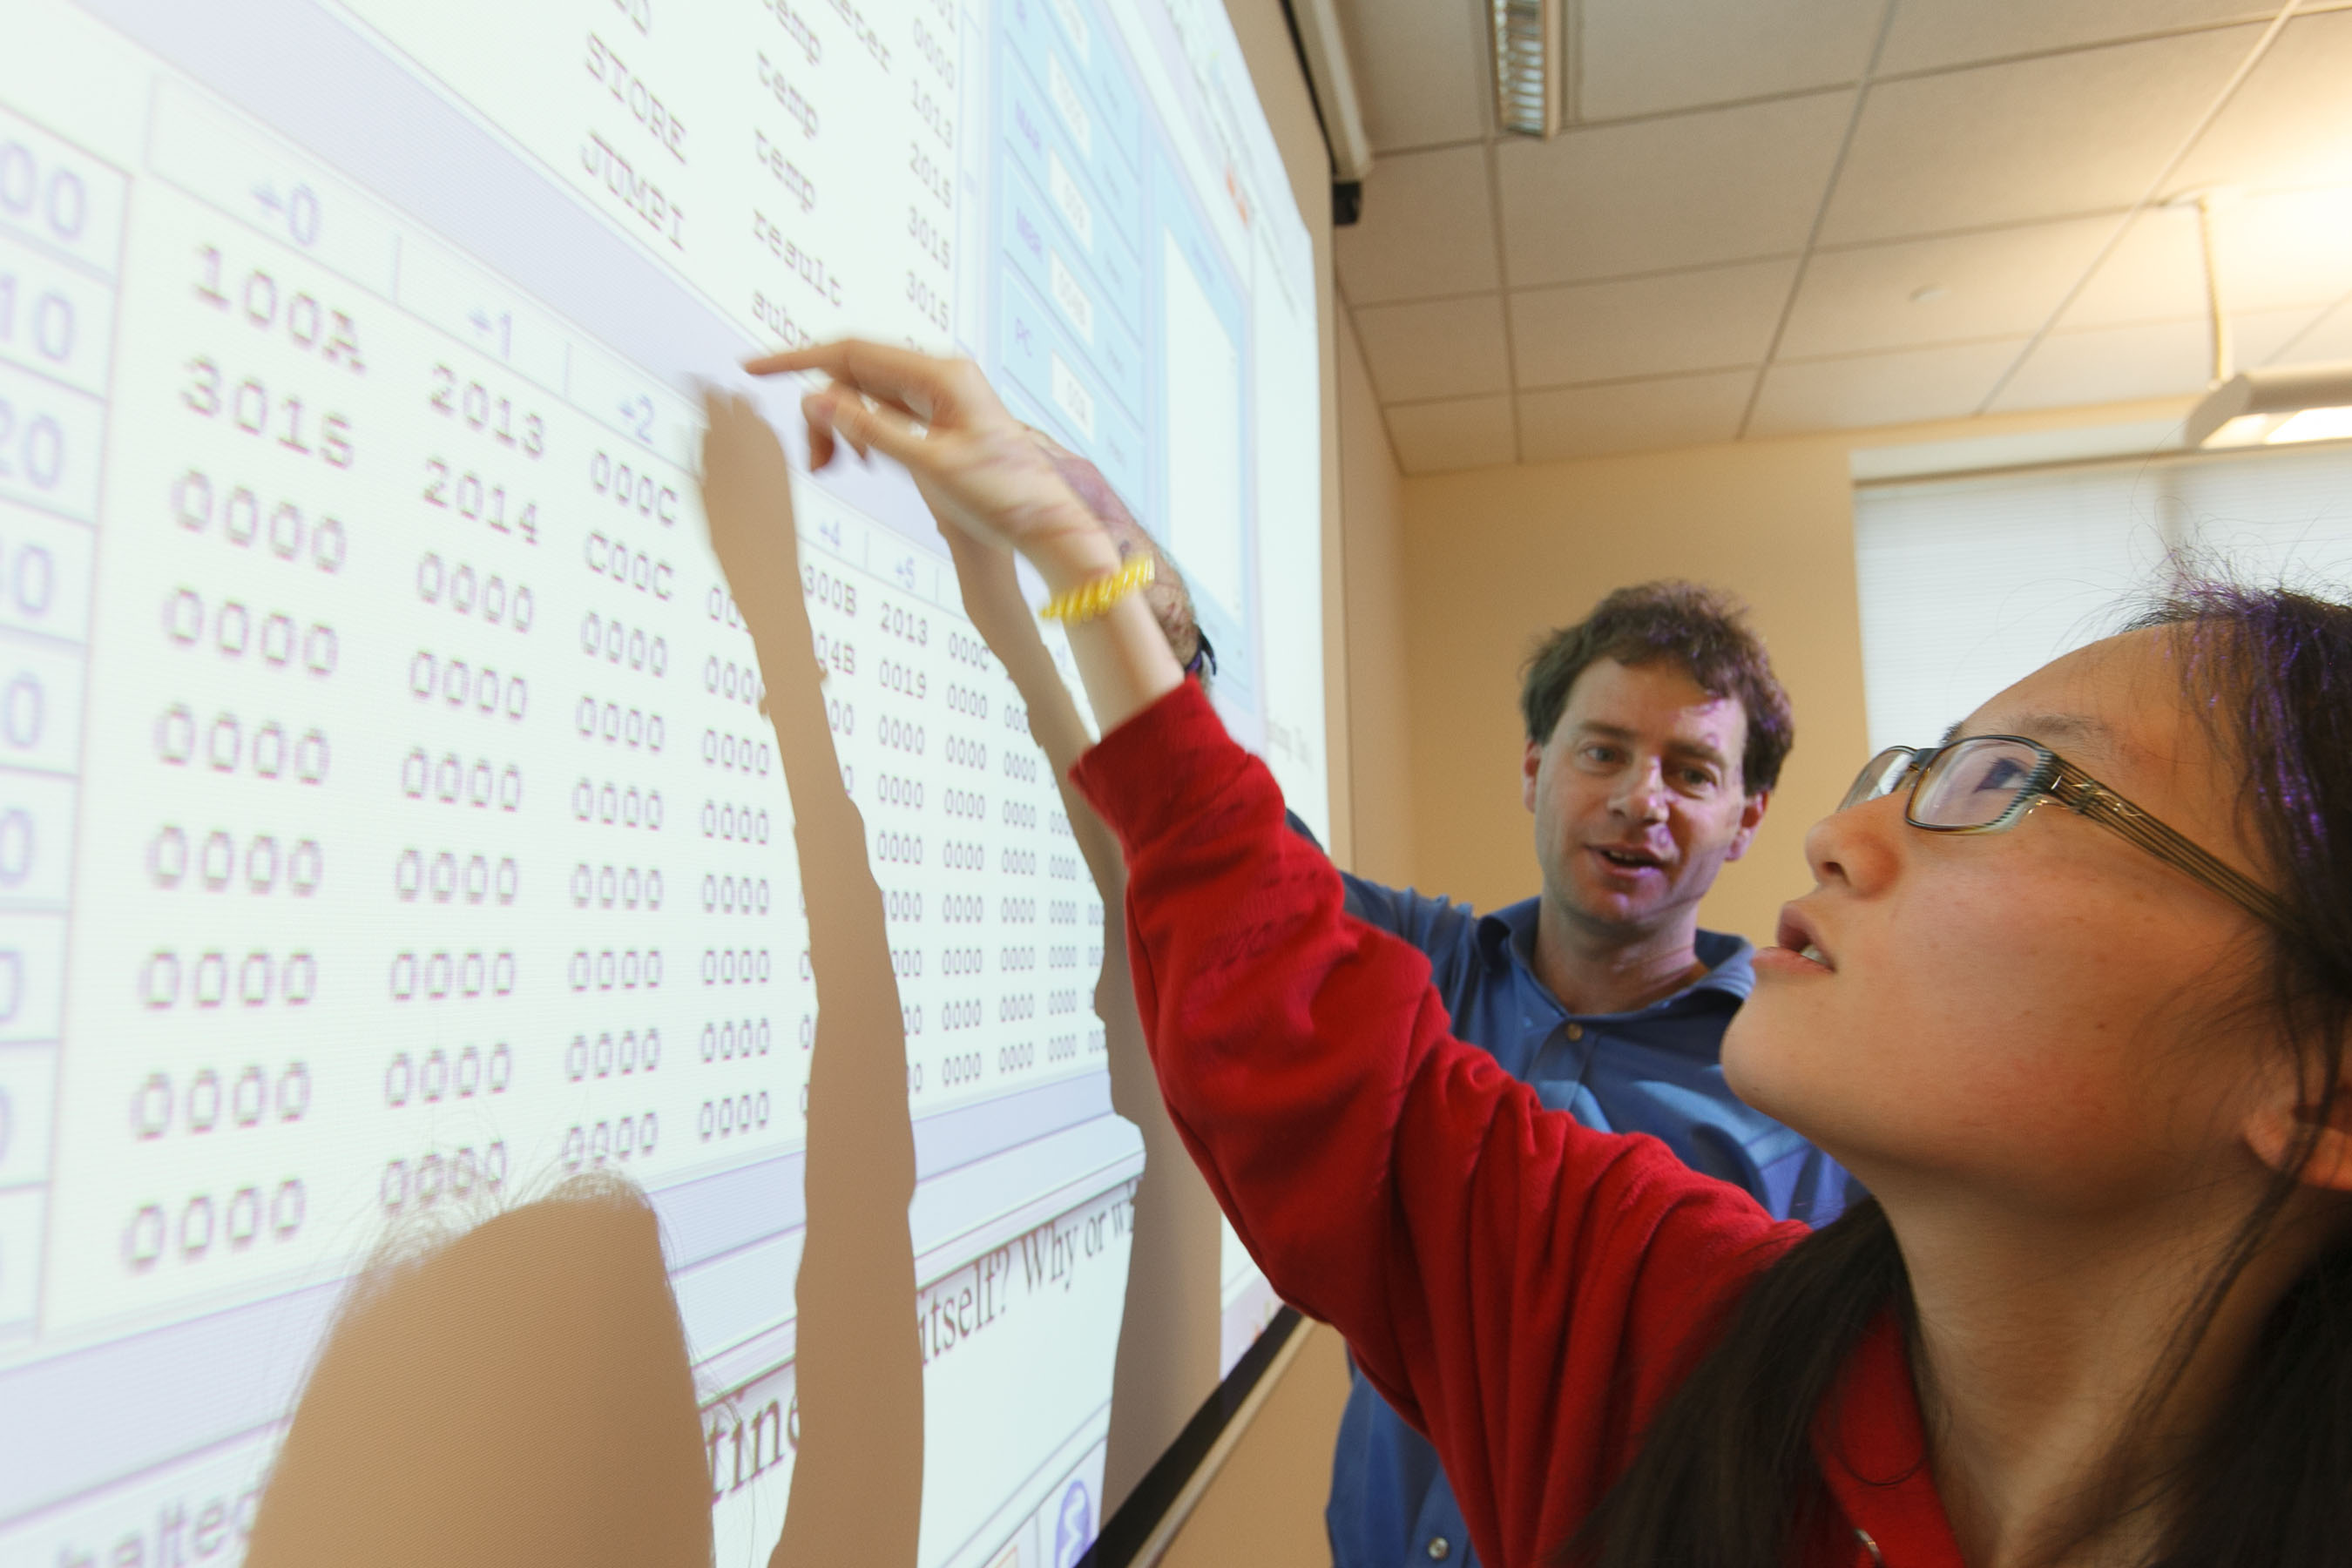 Student and teacher at a smartboard